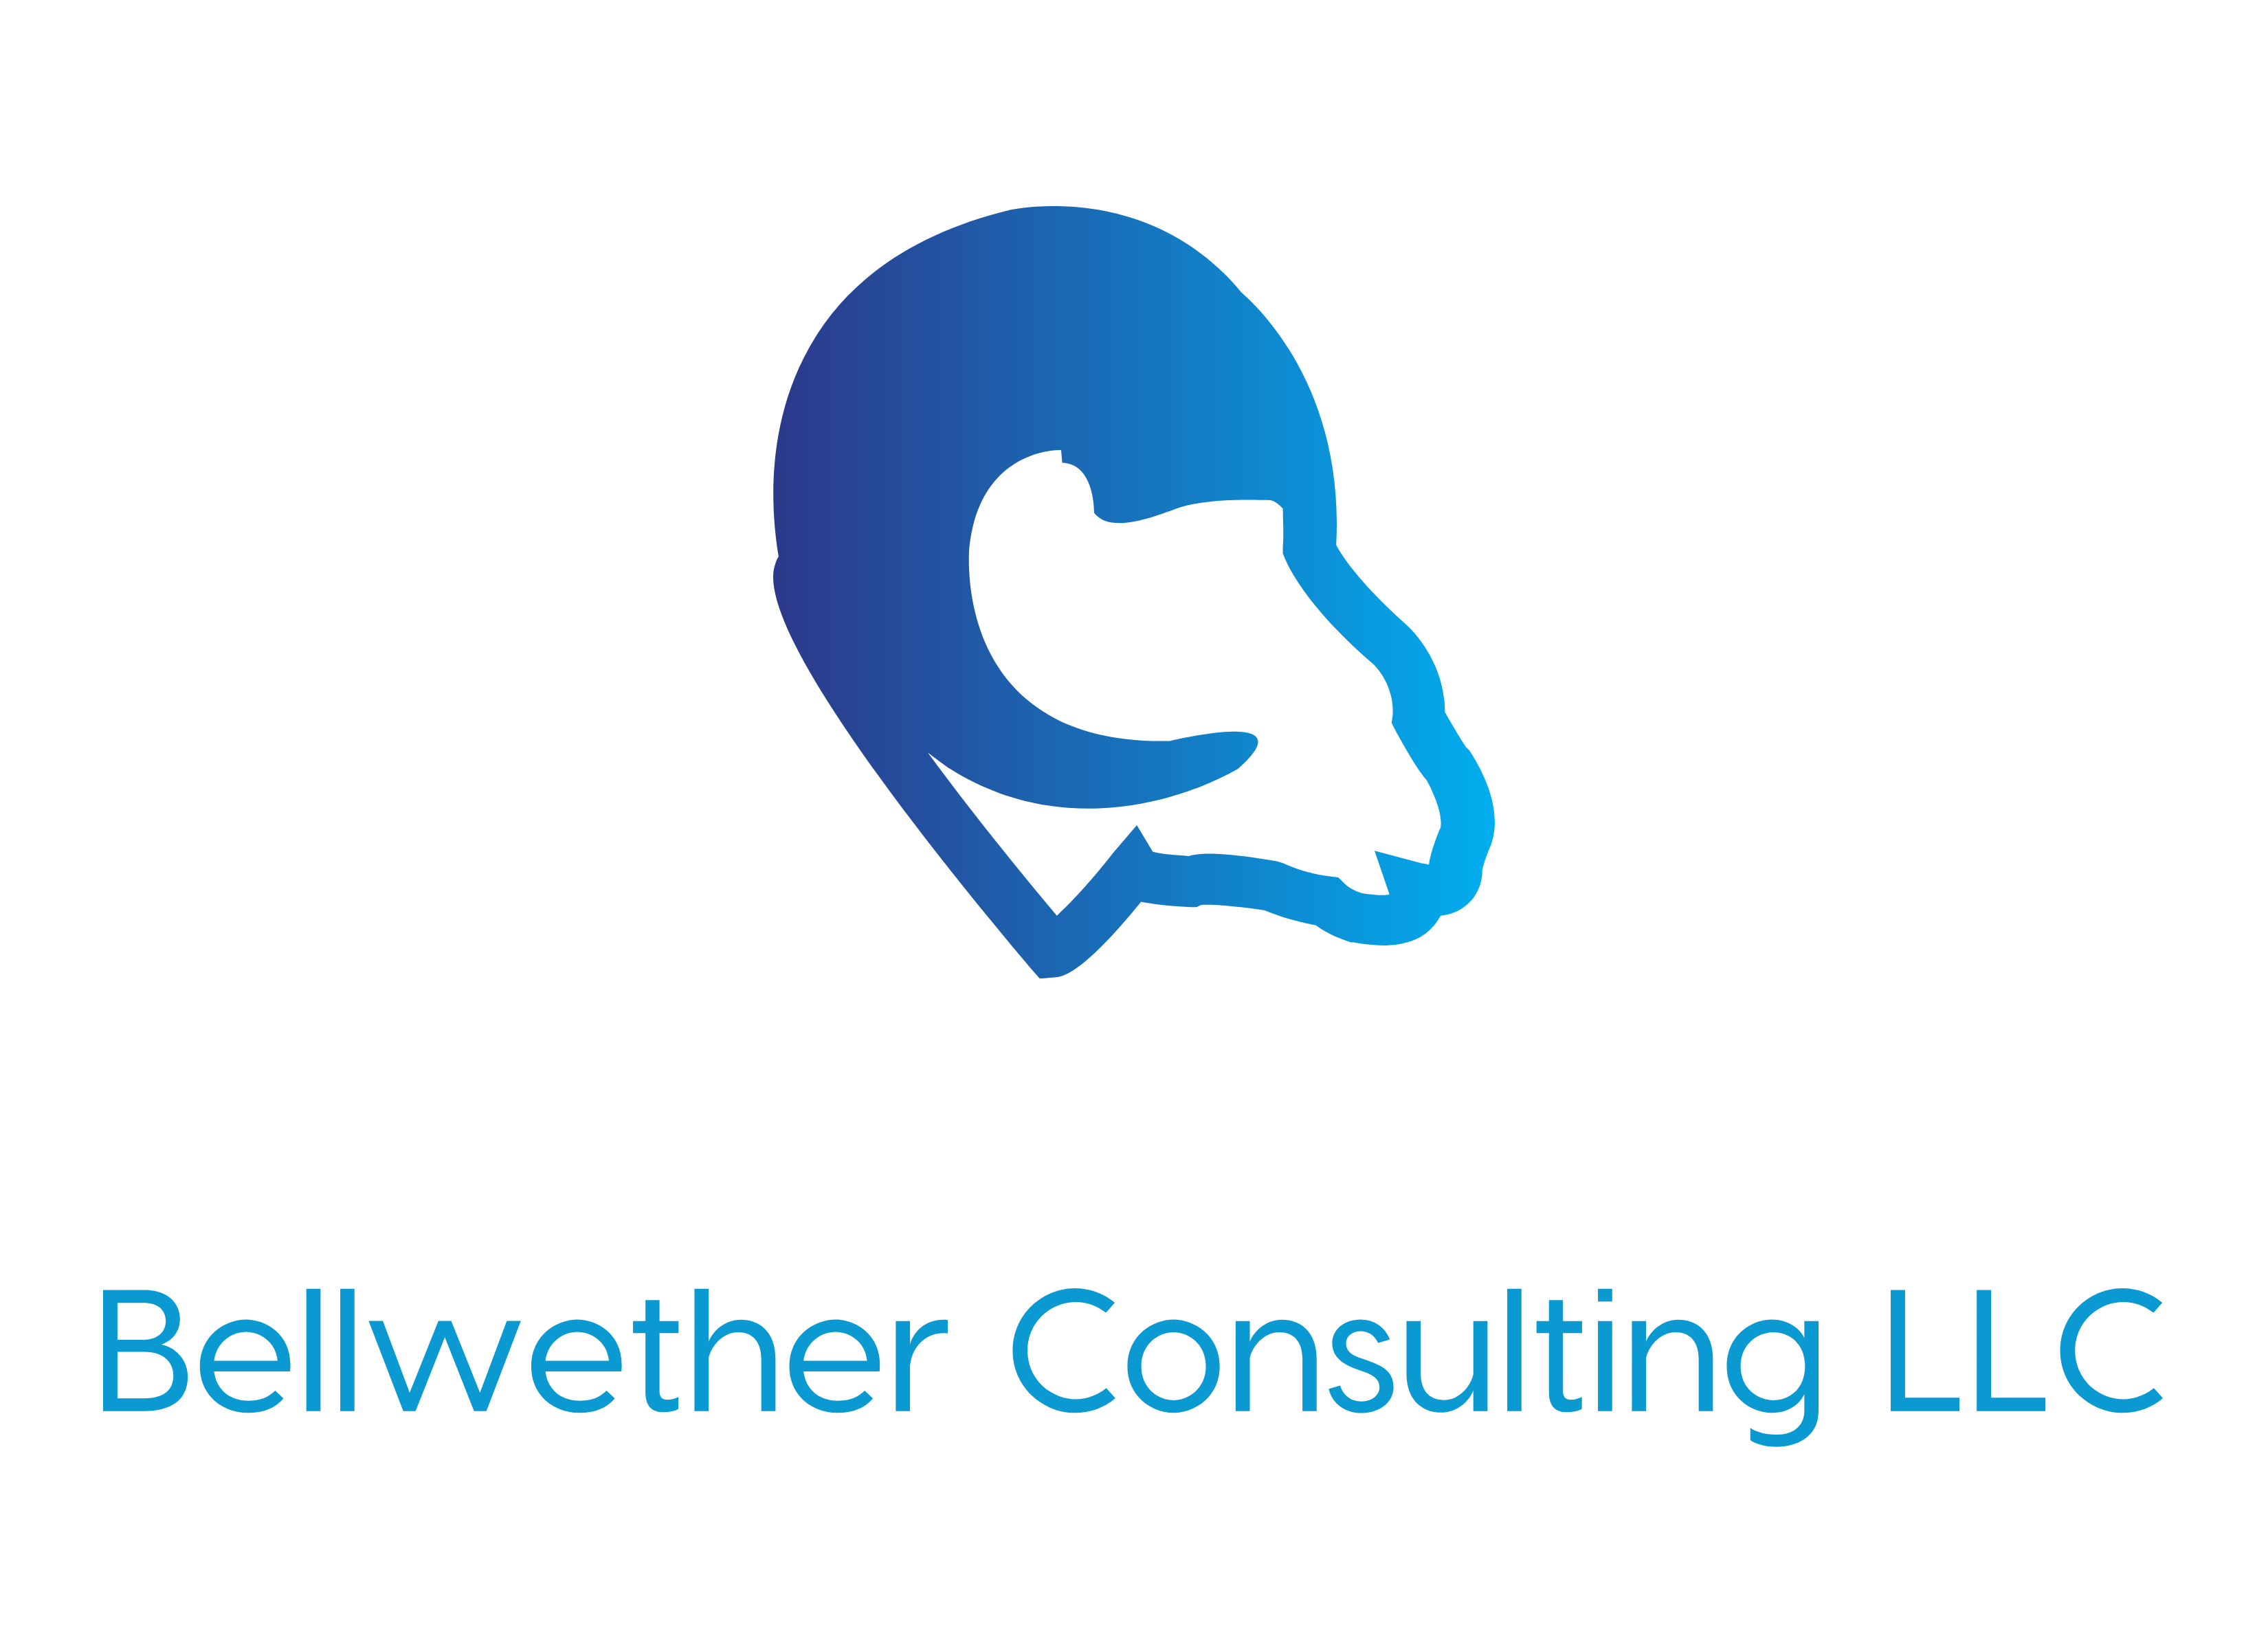 Bellwether Consulting, LLC